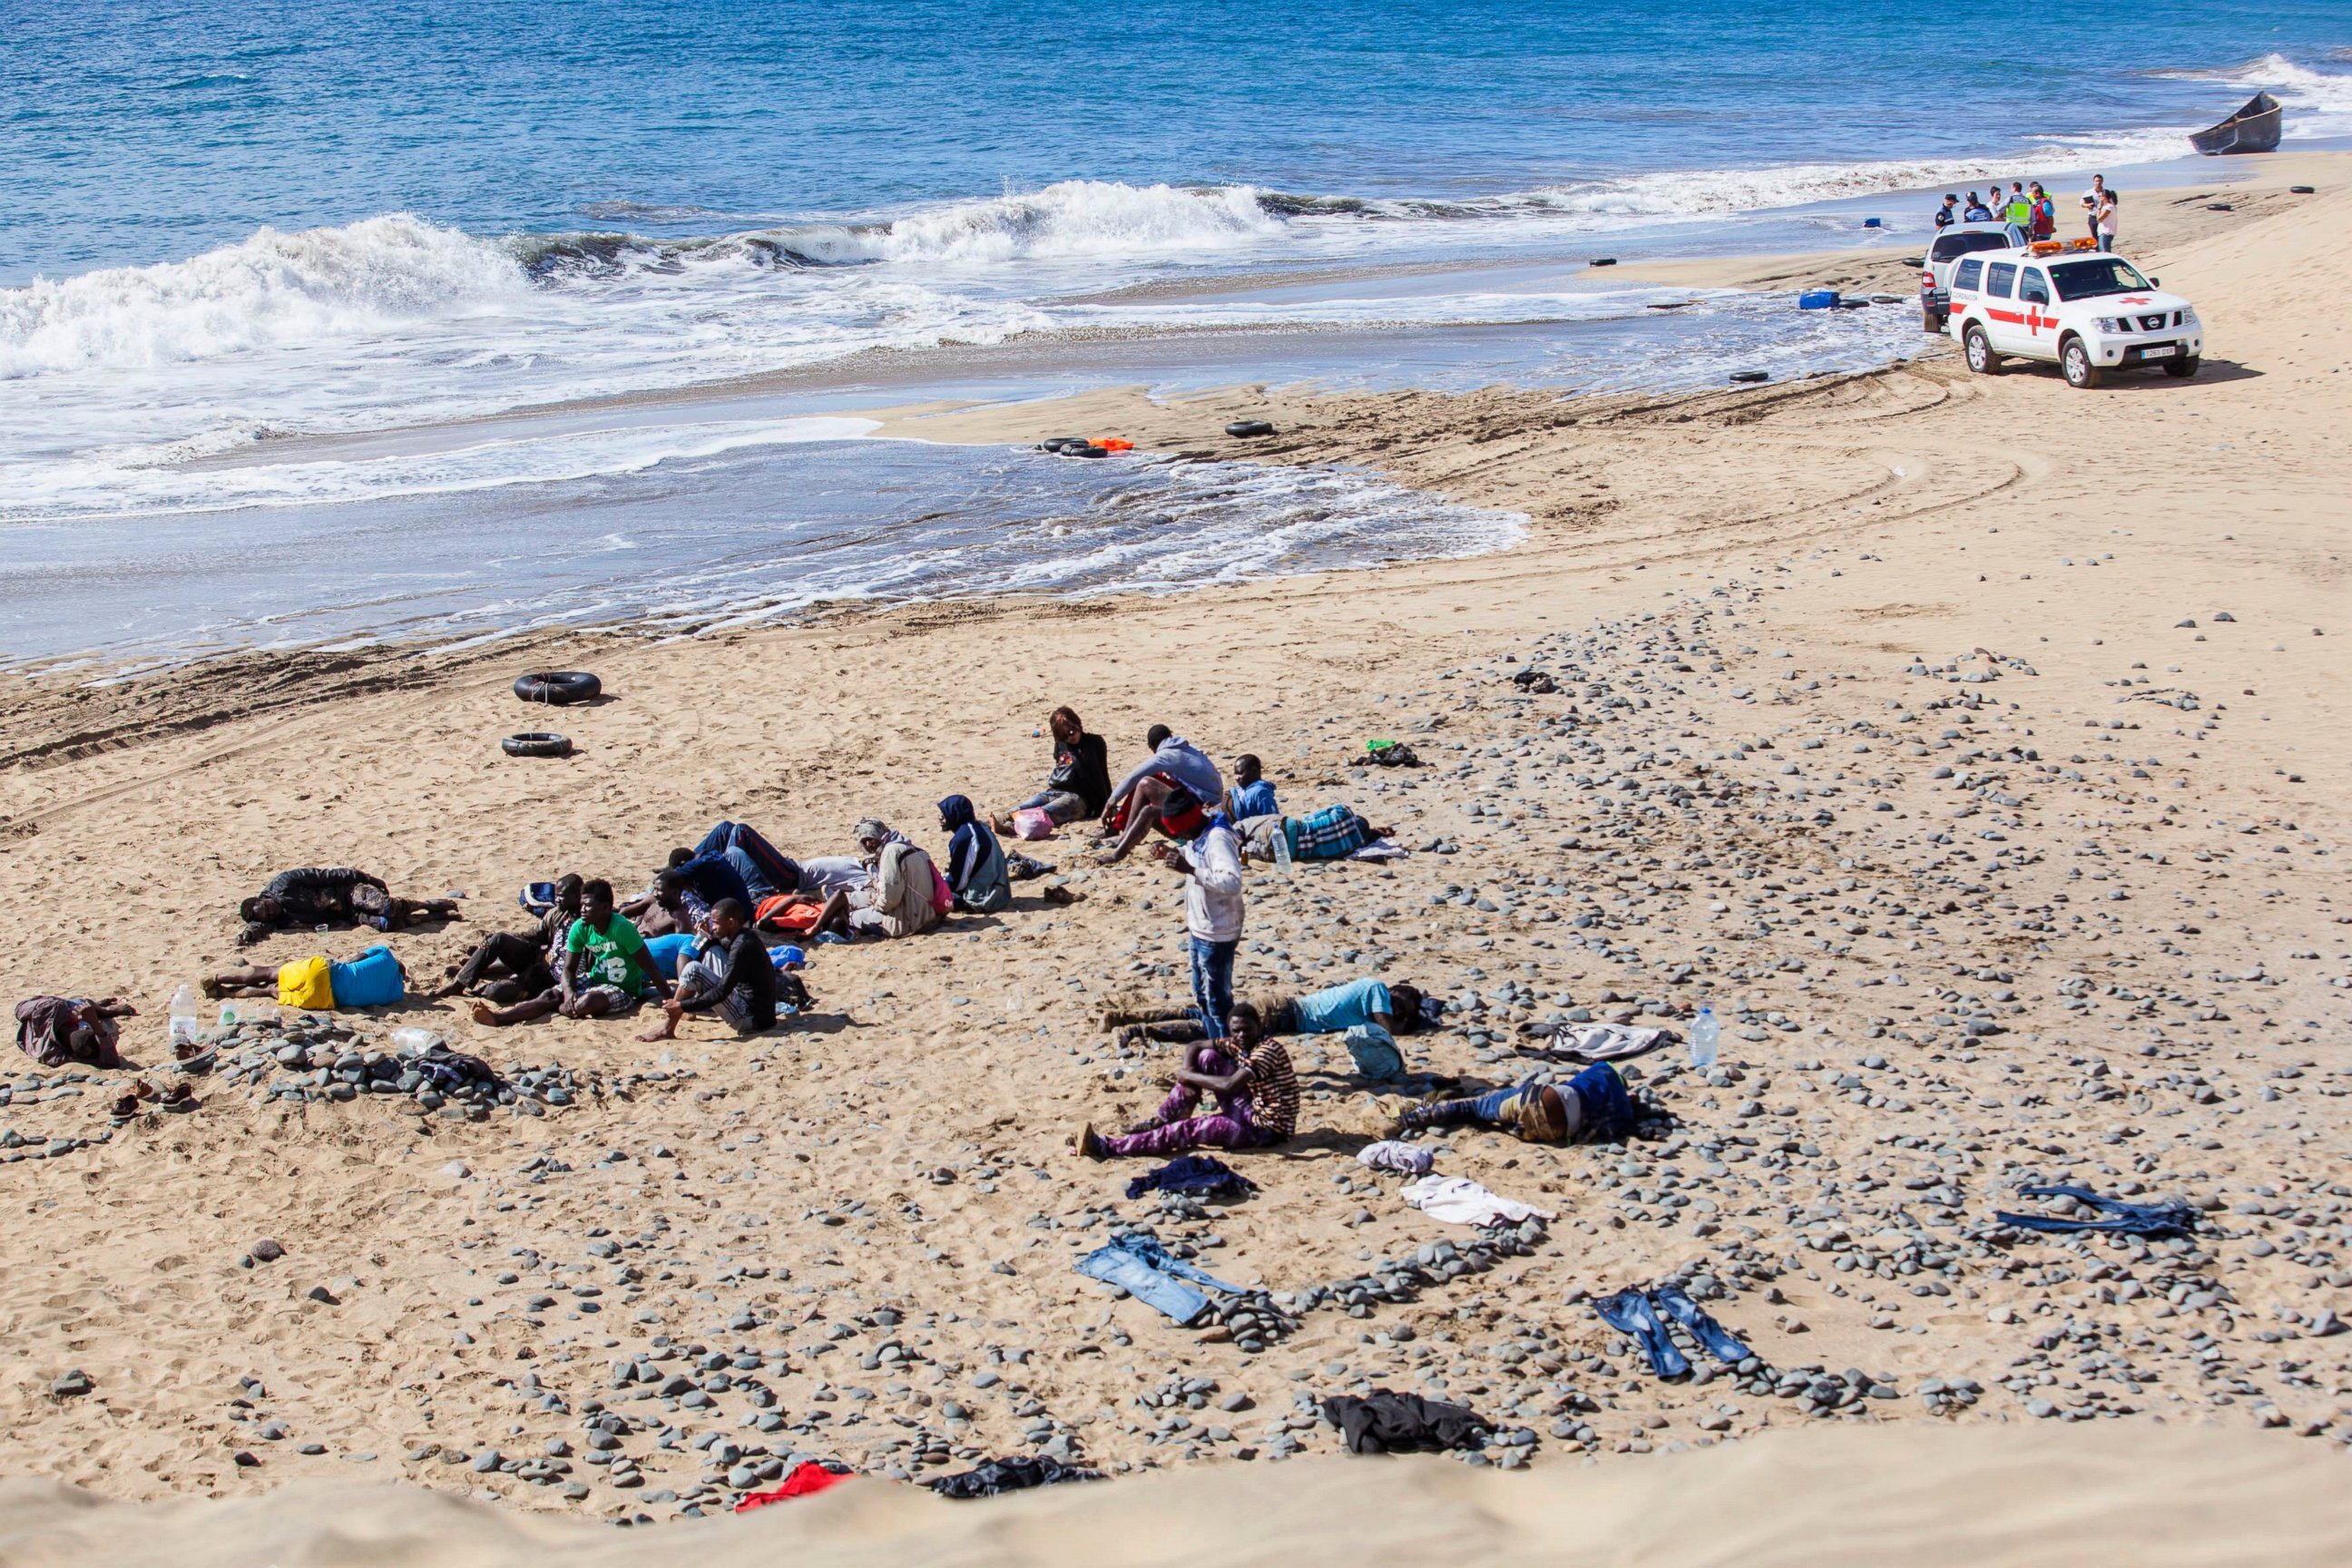 PHOTO: People who arrived by boat from Africa rest at Maspalomas beach on Gran Canaria, Spain's Canary Islands, Nov. 5, 2014. 